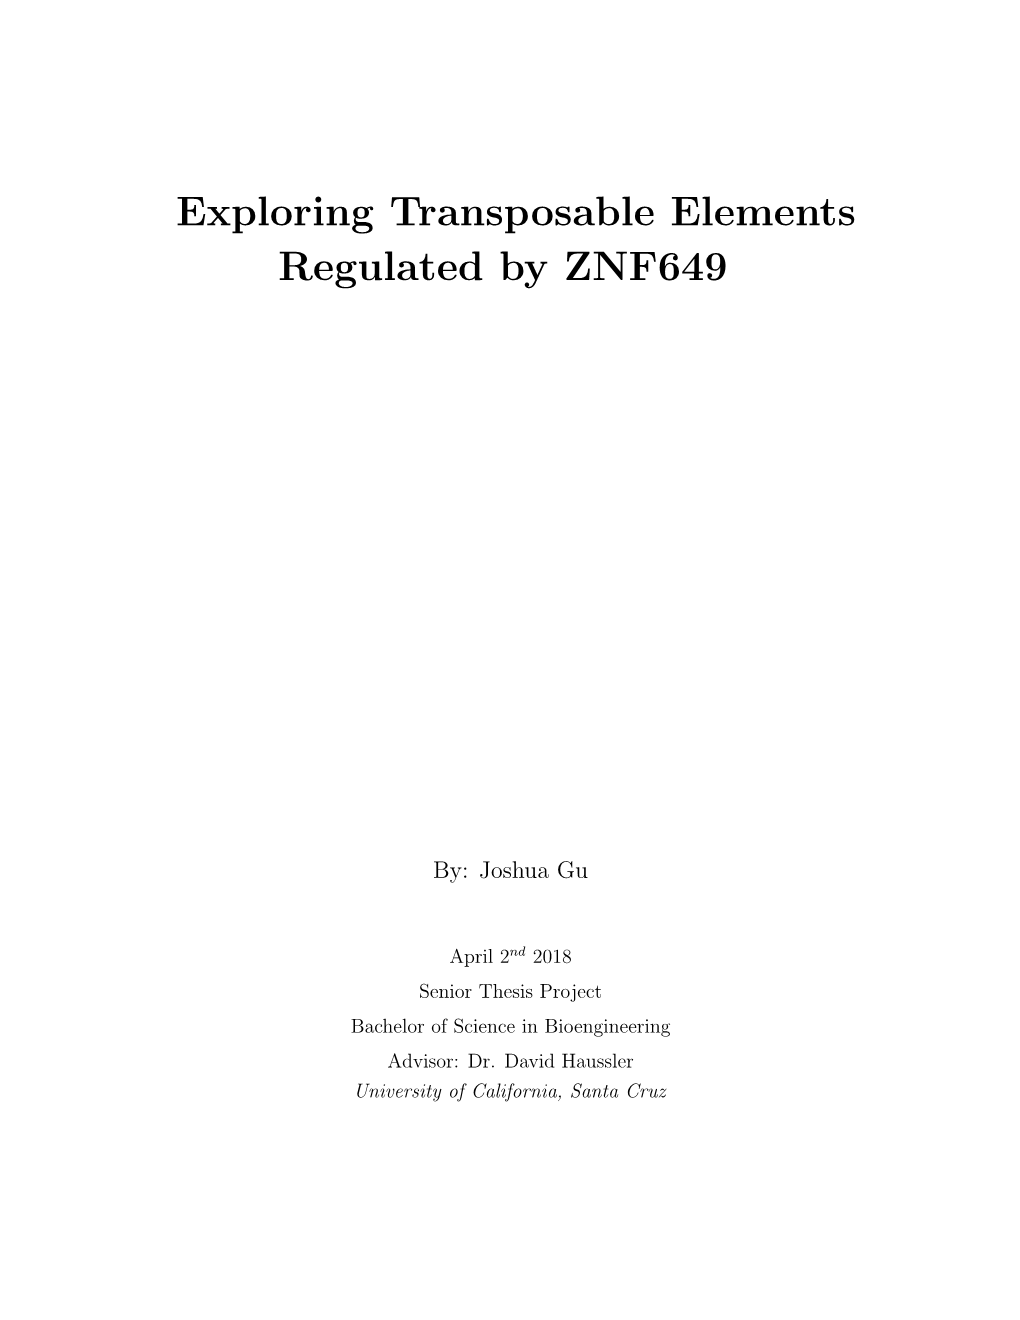 Exploring Transposable Elements Regulated by ZNF649